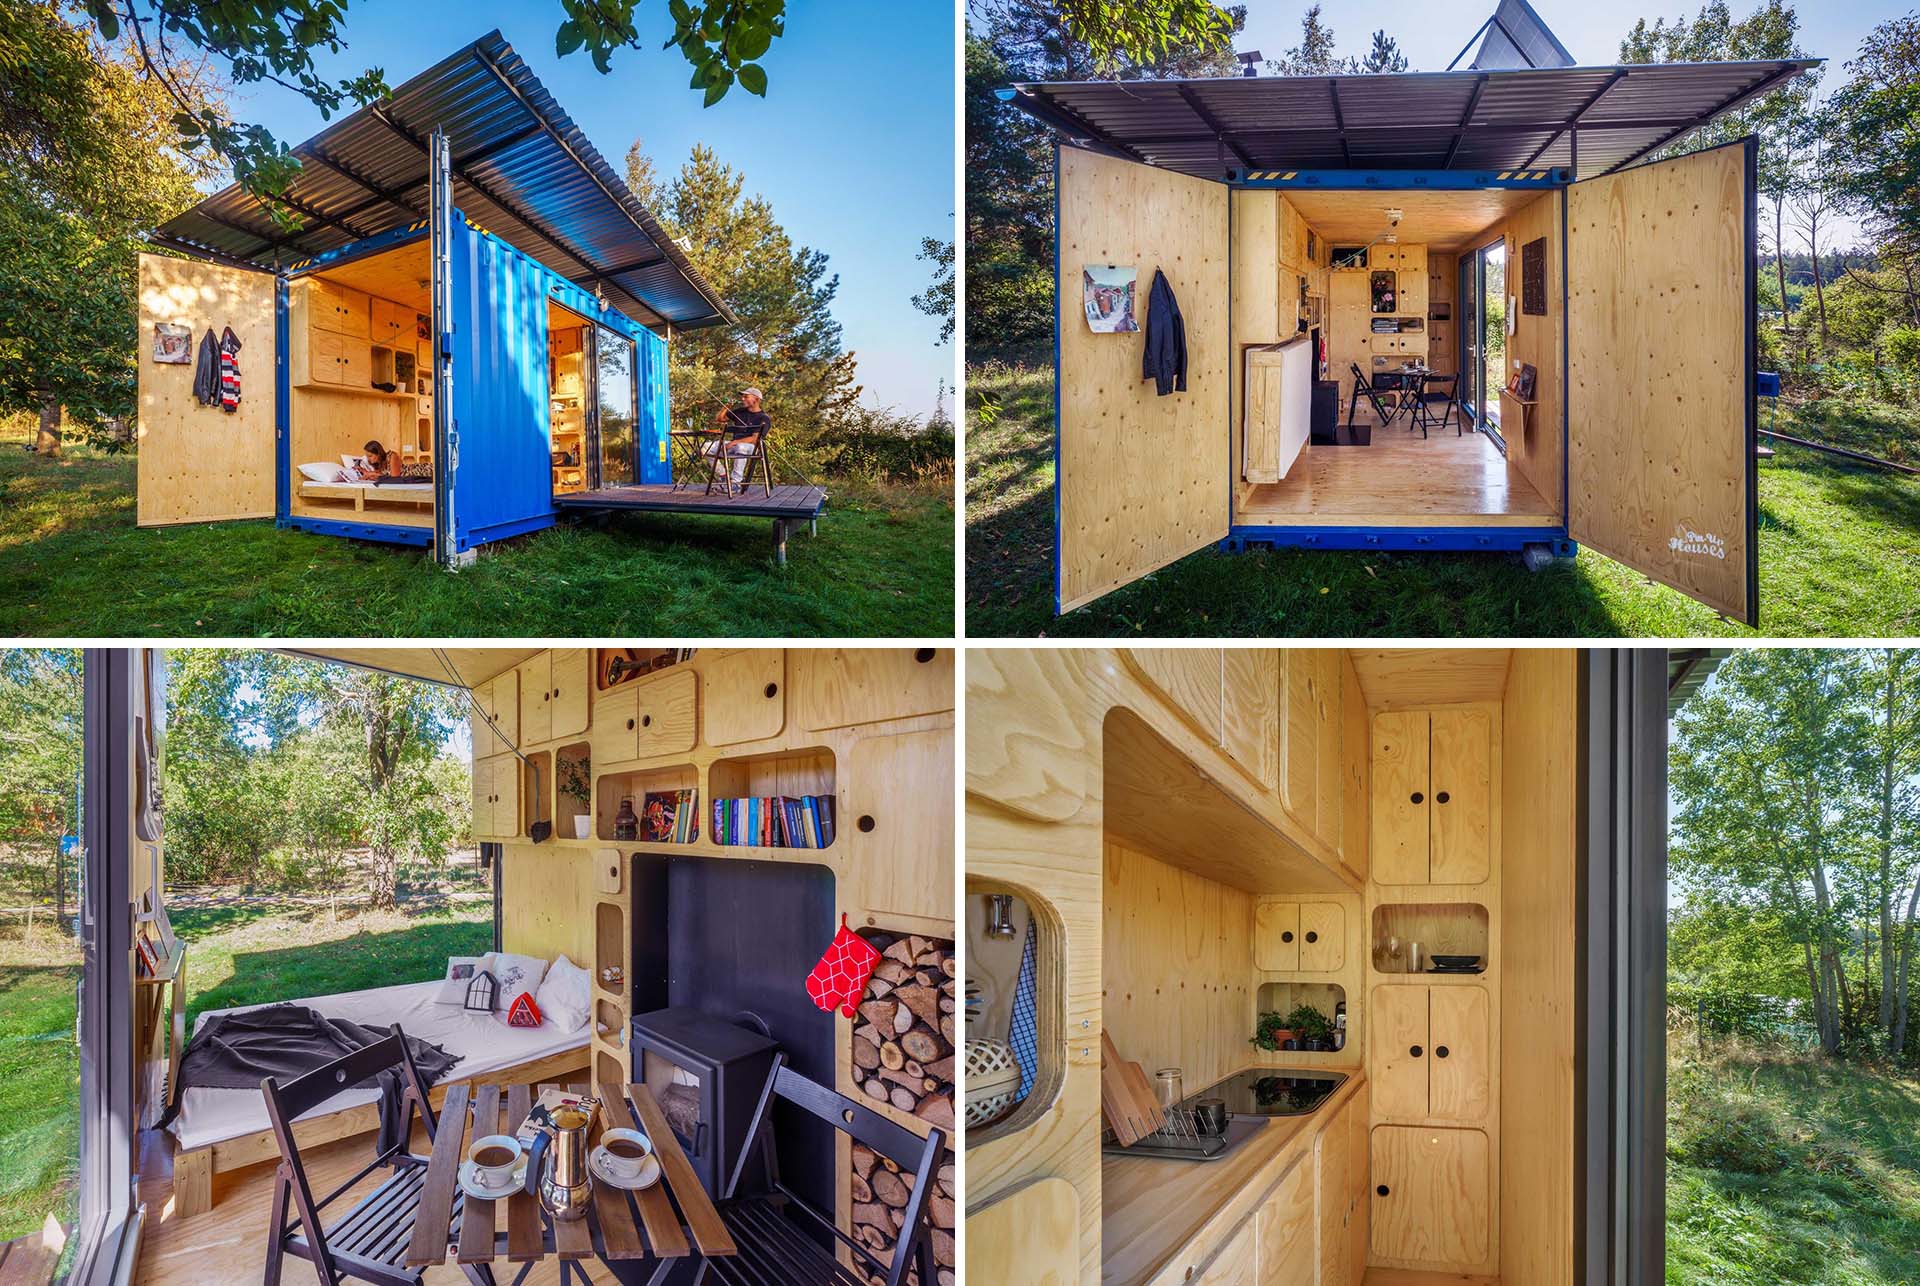 An off-grid tiny home made from a small shipping container.